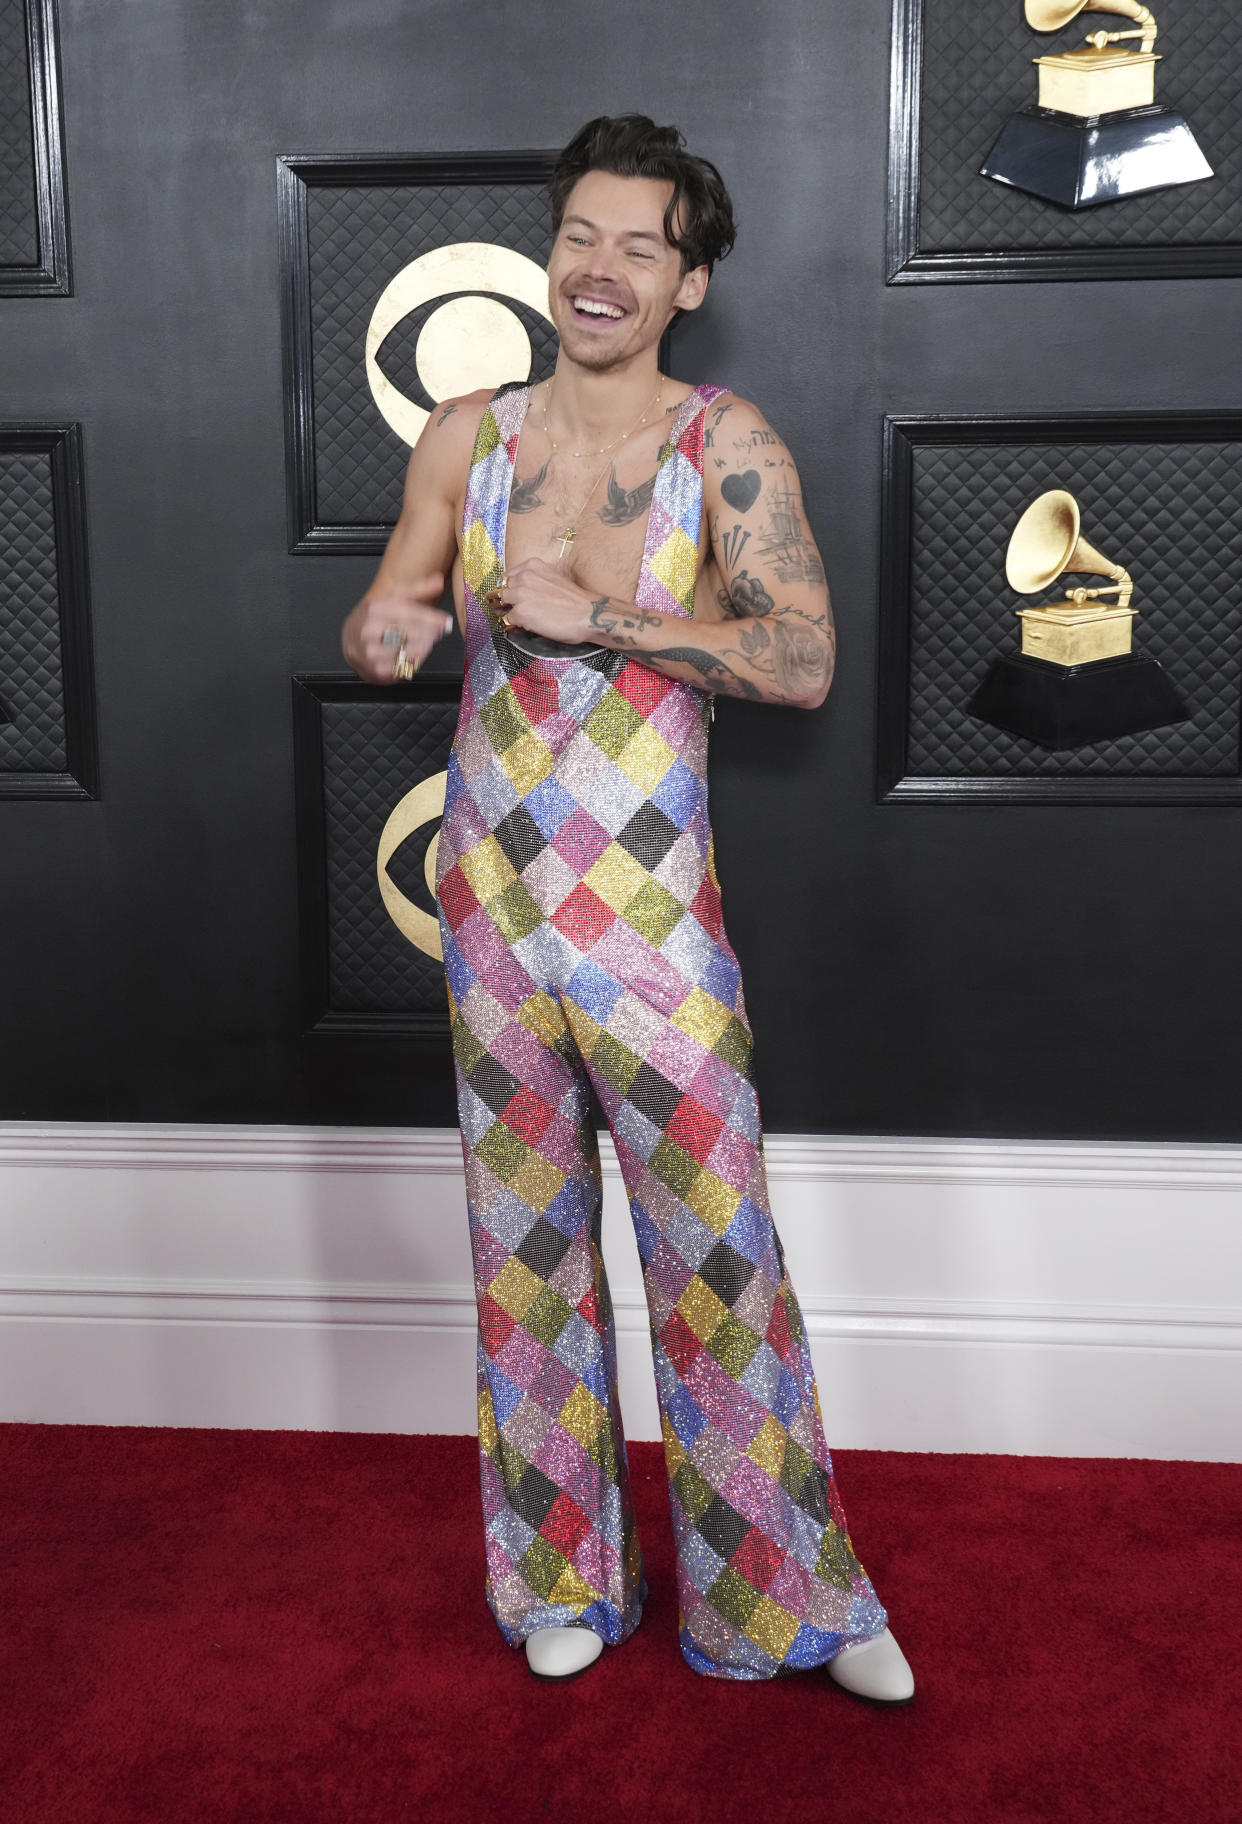 Harry Styles arrives at the 65th annual Grammy Awards on Sunday, Feb. 5, 2023, in Los Angeles. (Photo by Jordan Strauss/Invision/AP)